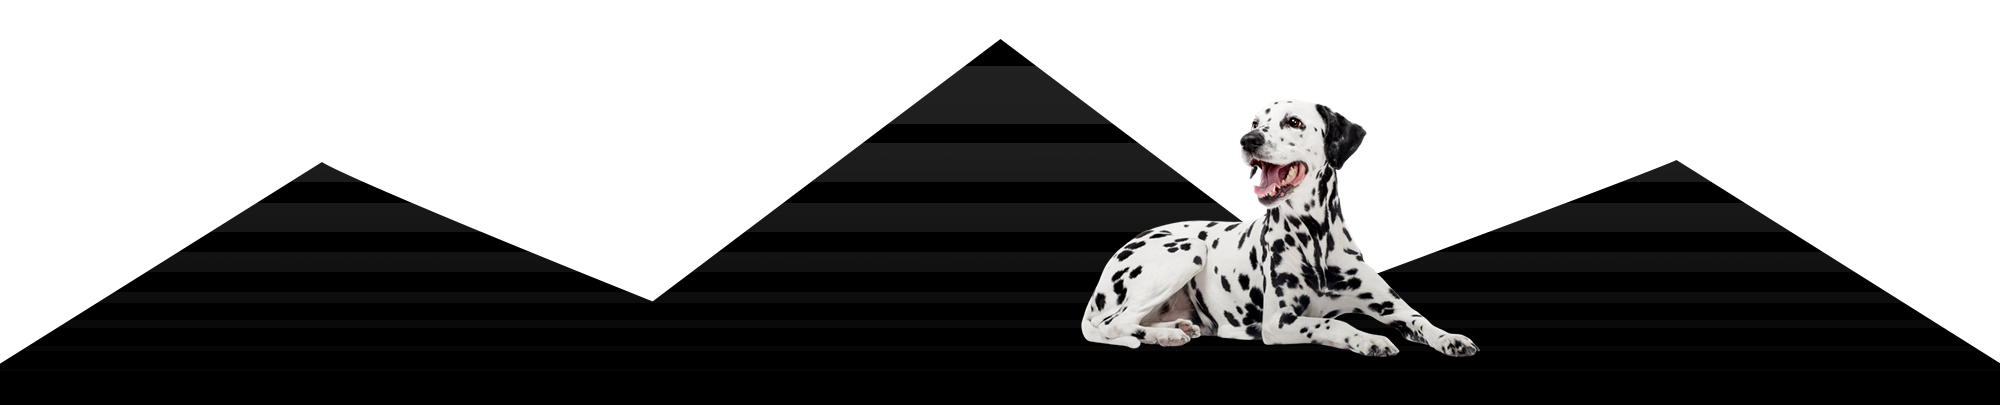 roof peaks with dalmation